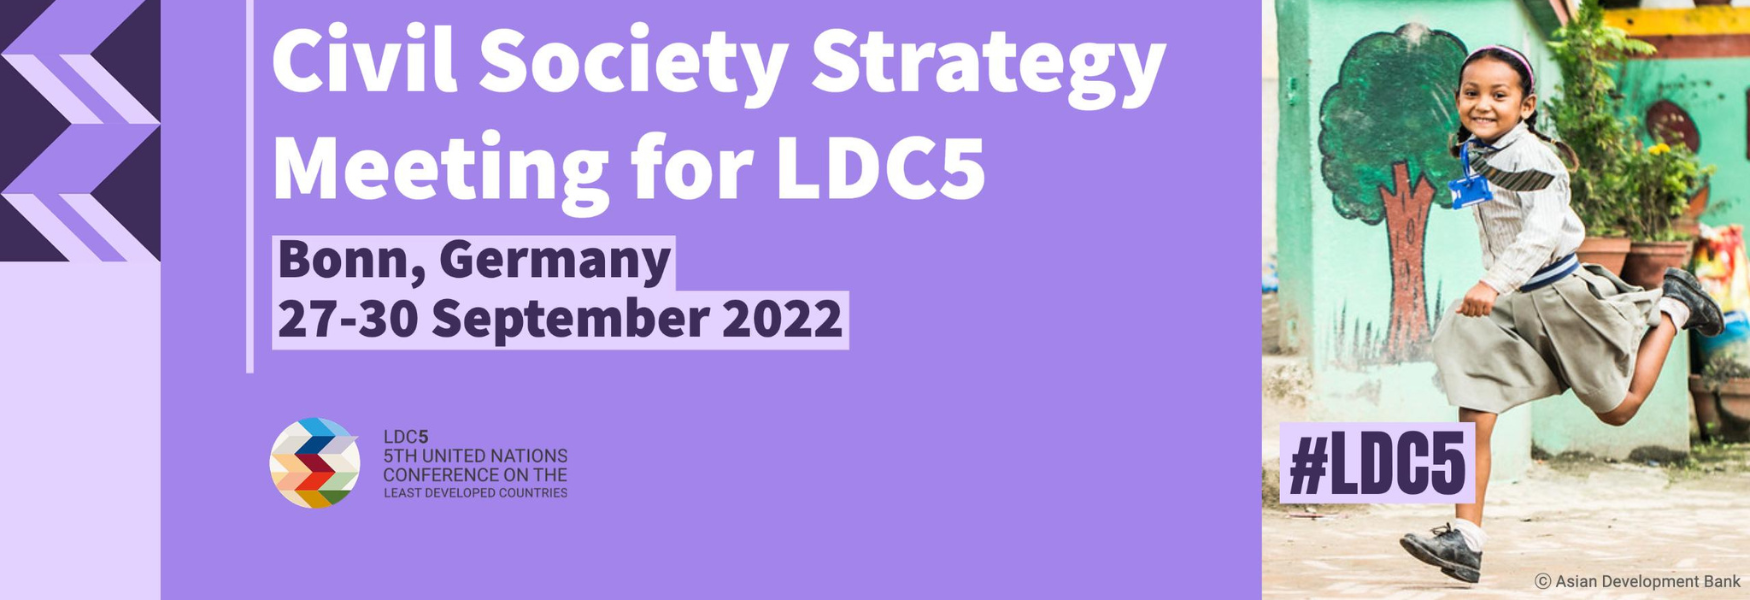 Civil Society Strategy Meeting for LDC5 